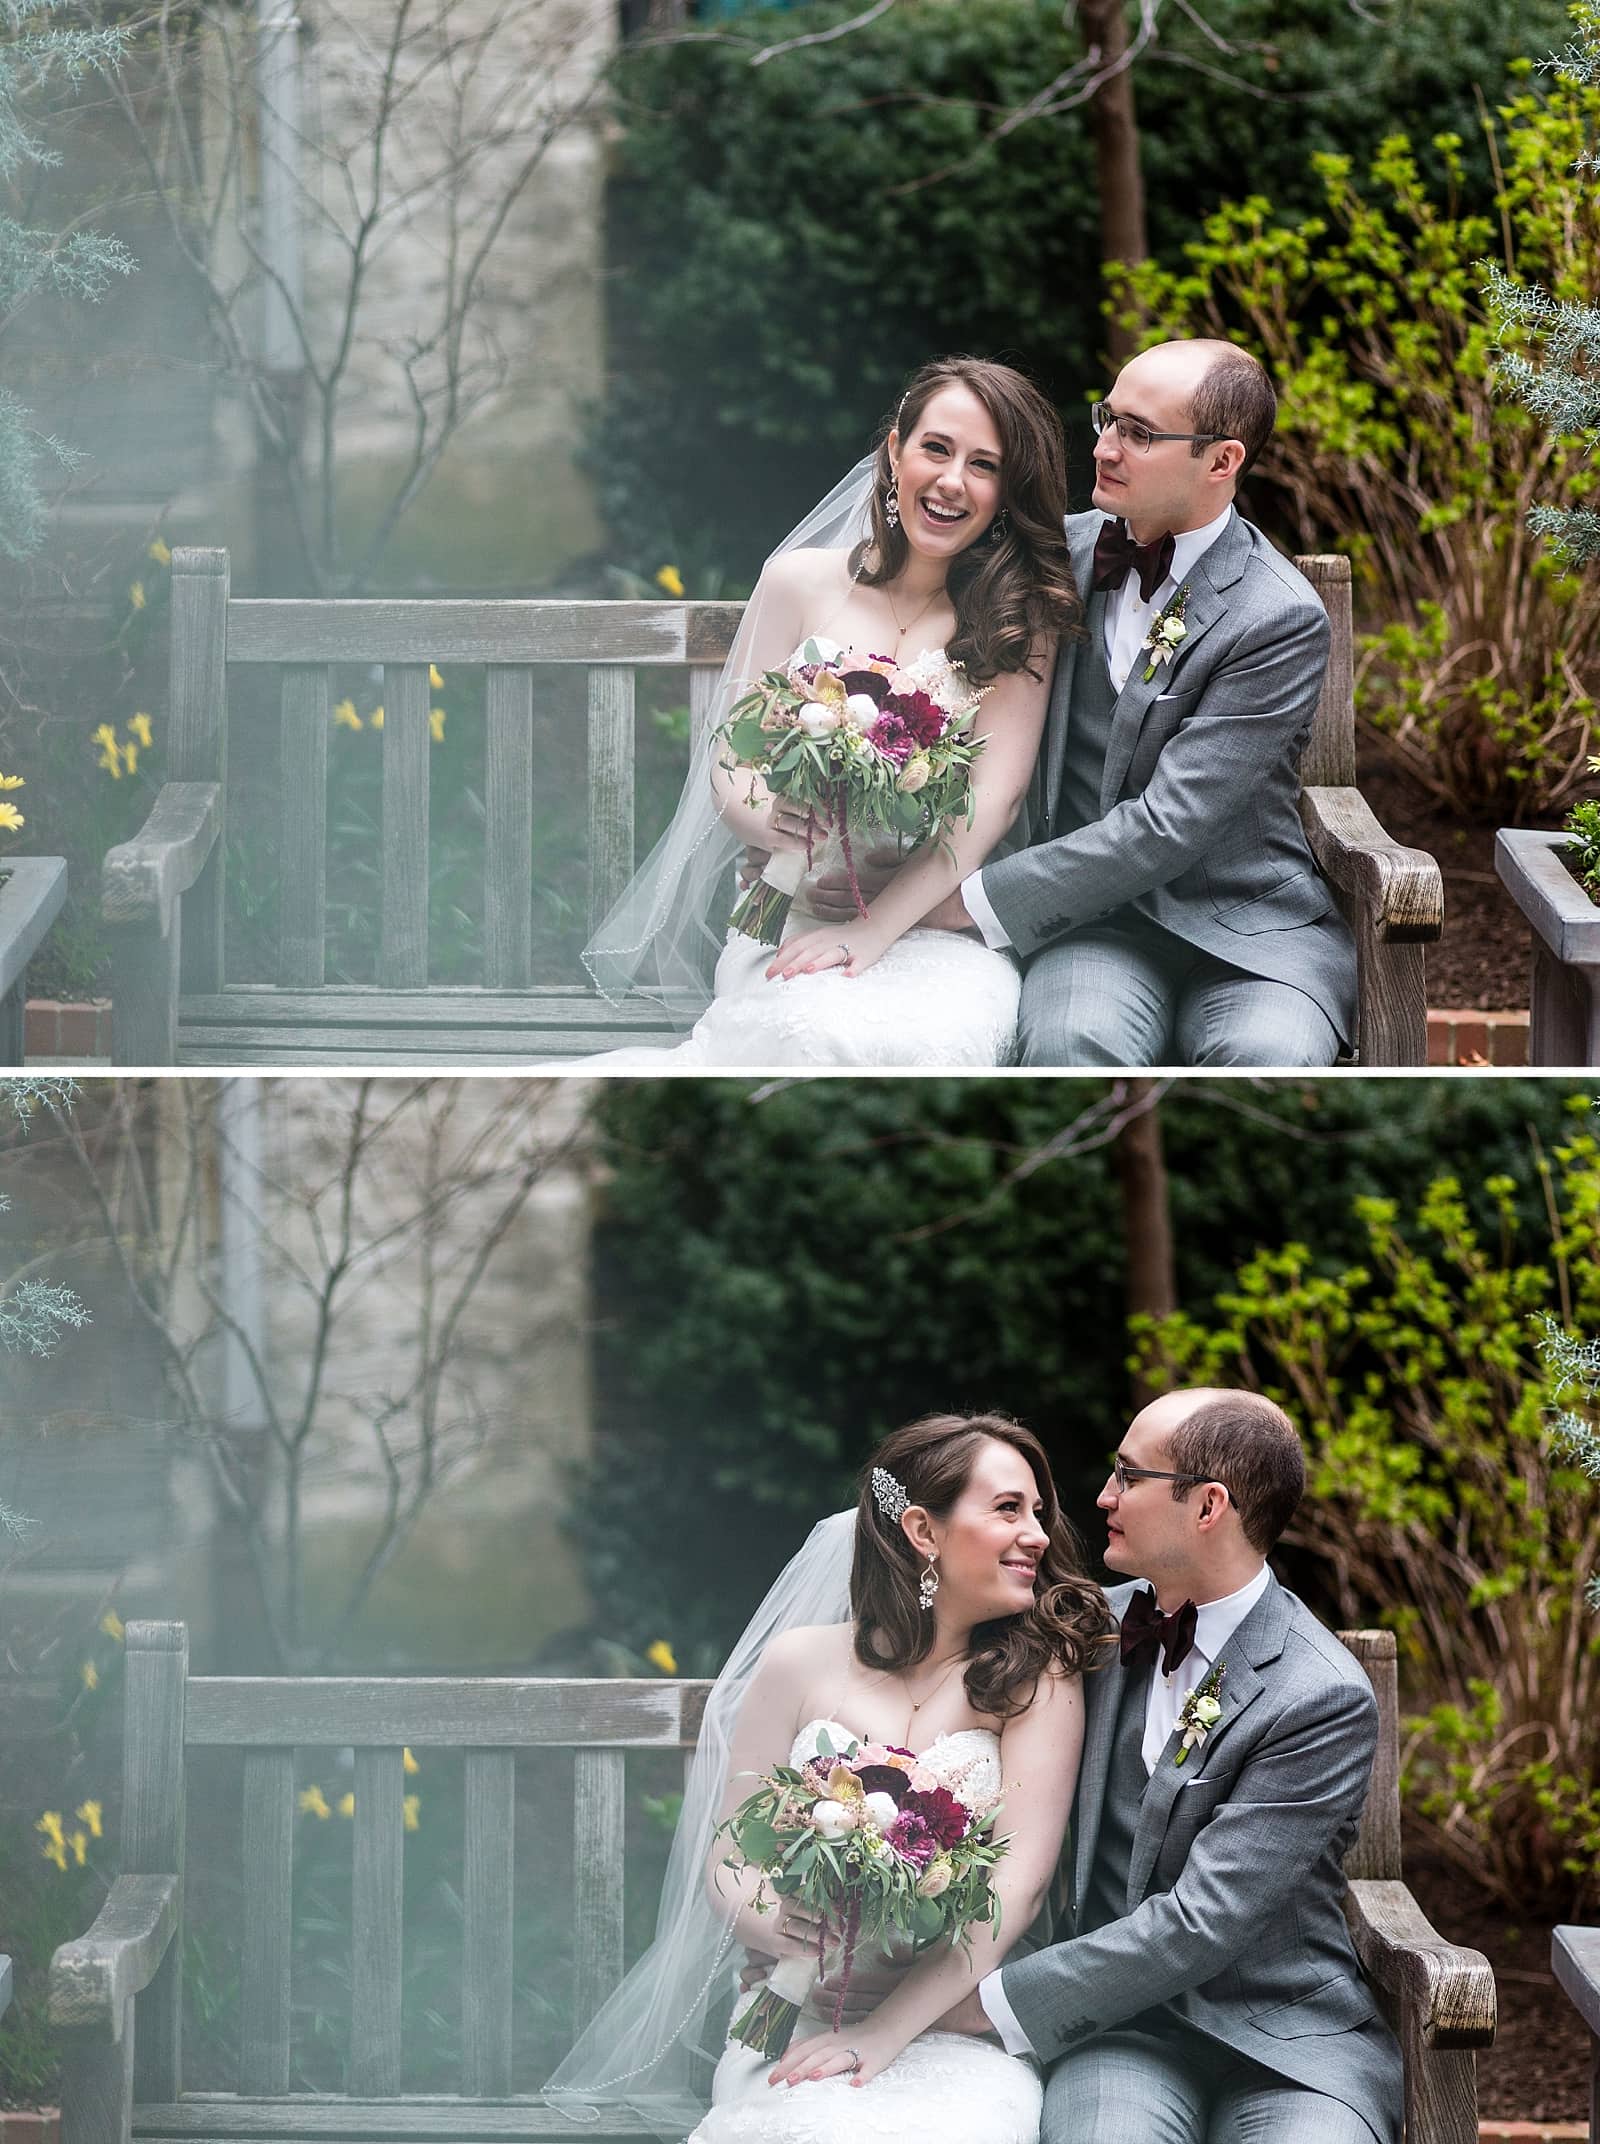 Intimate bride and groom portraits outside on bench with greenery and bouquet, College of Physicians wedding